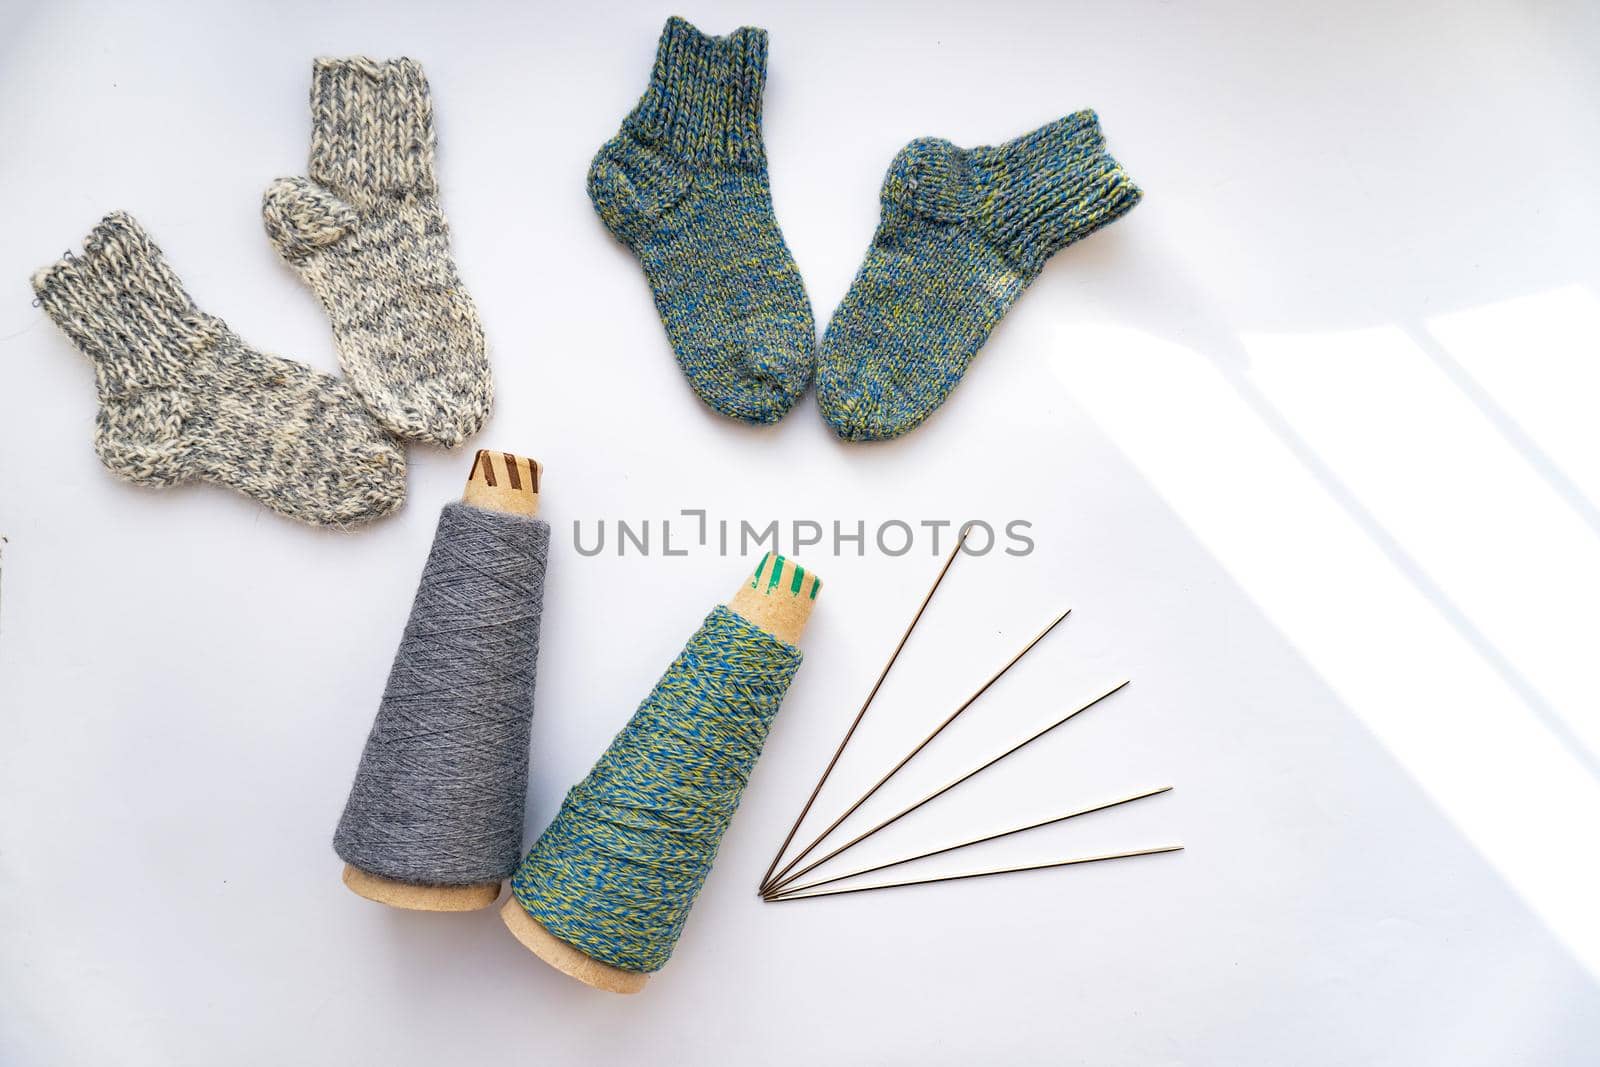 Socks, thread, needles are on white background with shadows, knitting concept.